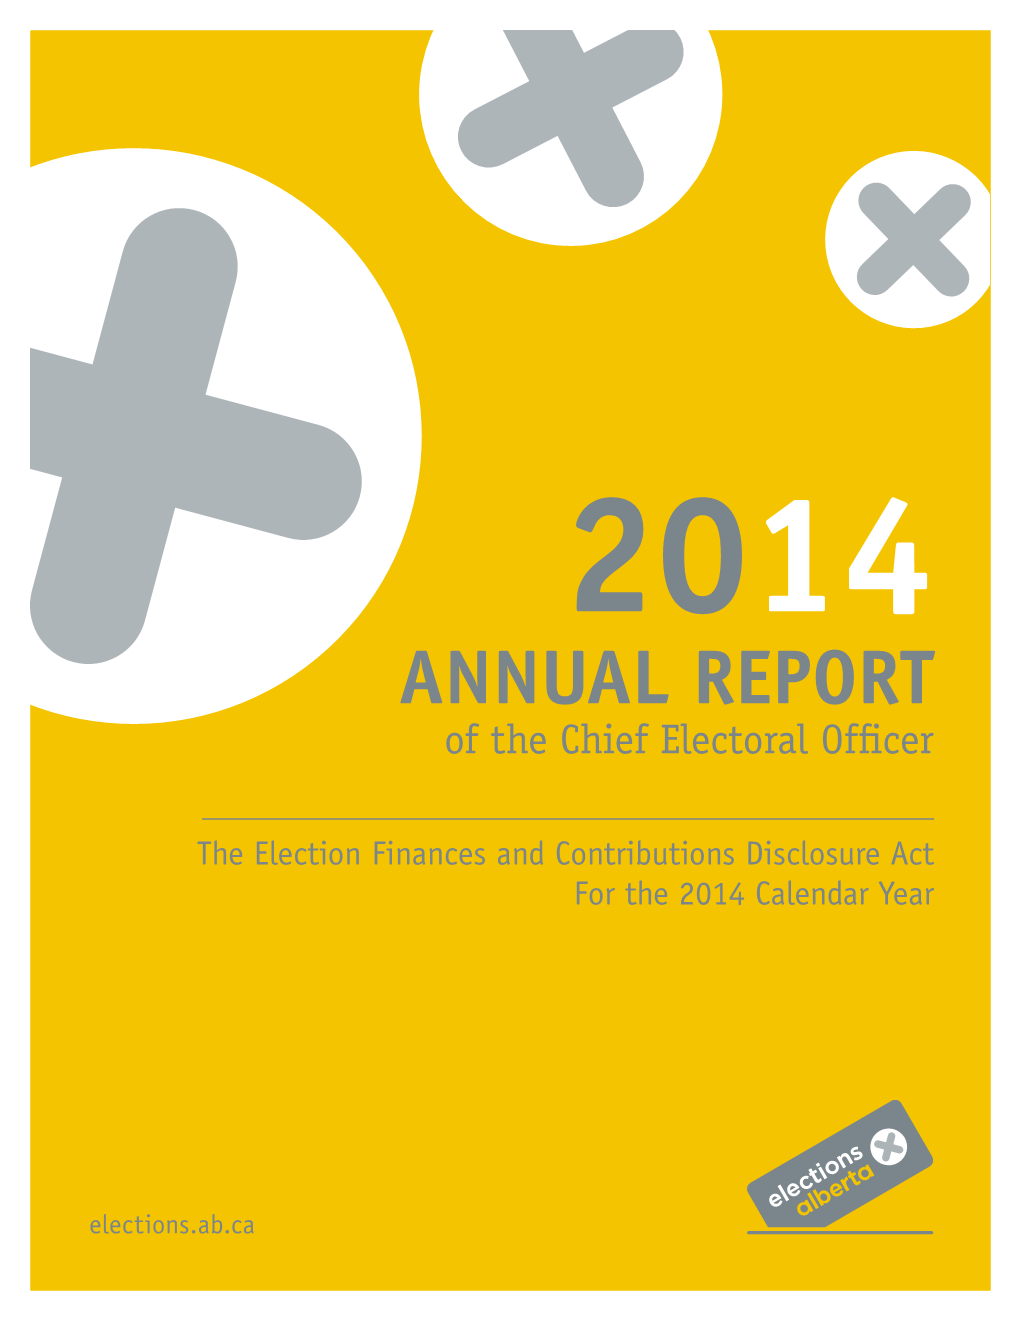 Annual Report of the Chief Electoral Officer